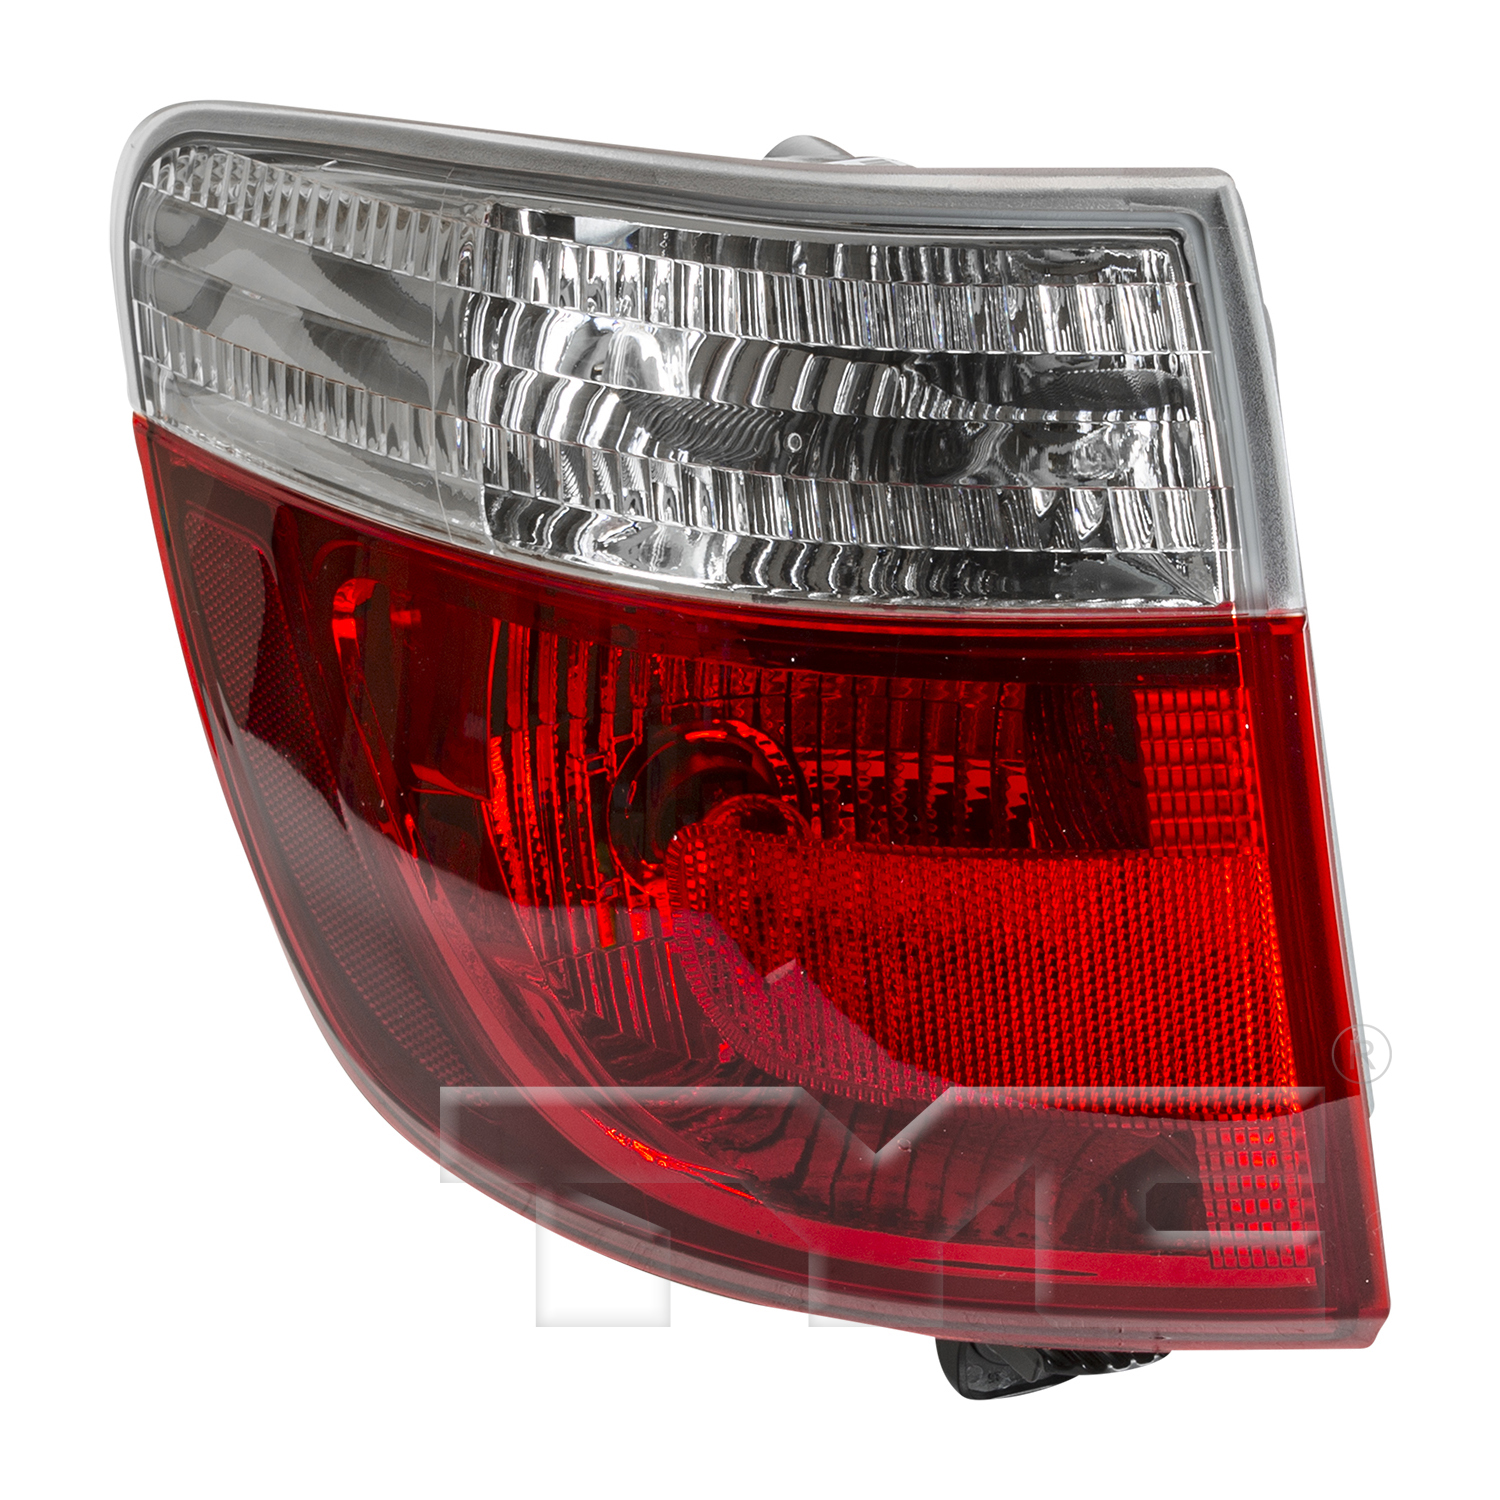 Aftermarket TAILLIGHTS for DODGE - DURANGO, DURANGO,11-13,LT Taillamp assy outer